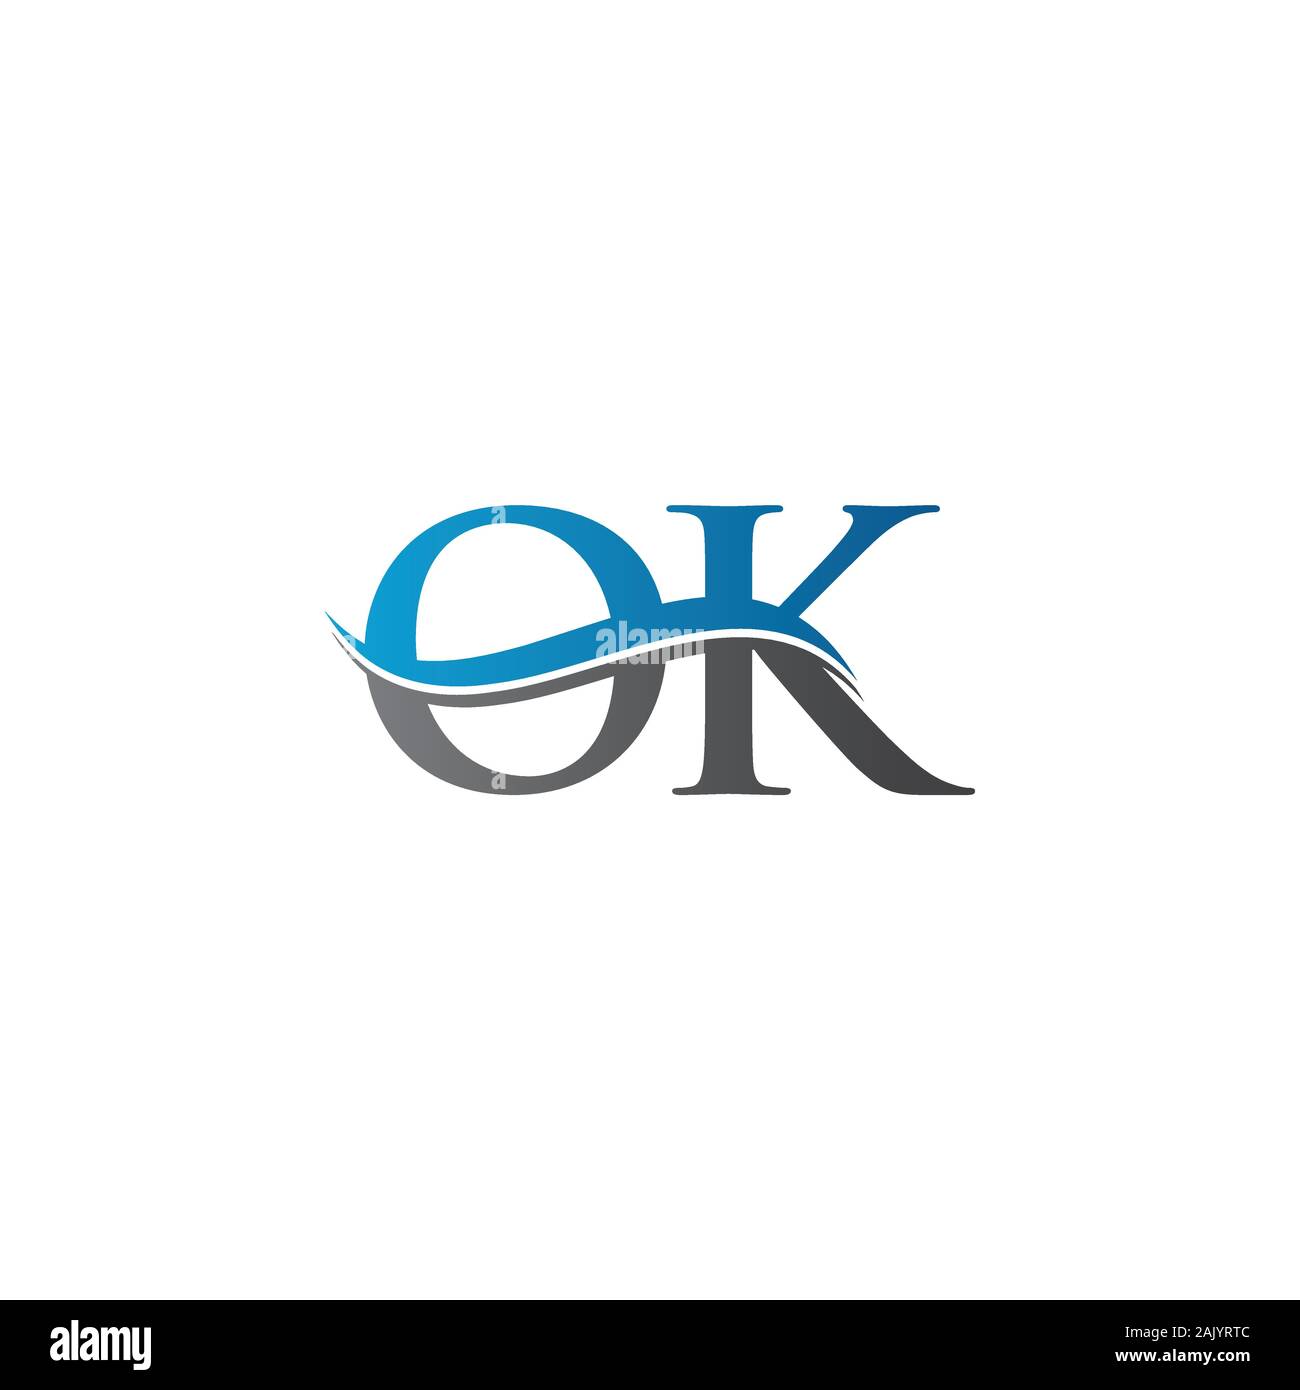 Ok logo Cut Out Stock Images & Pictures - Alamy